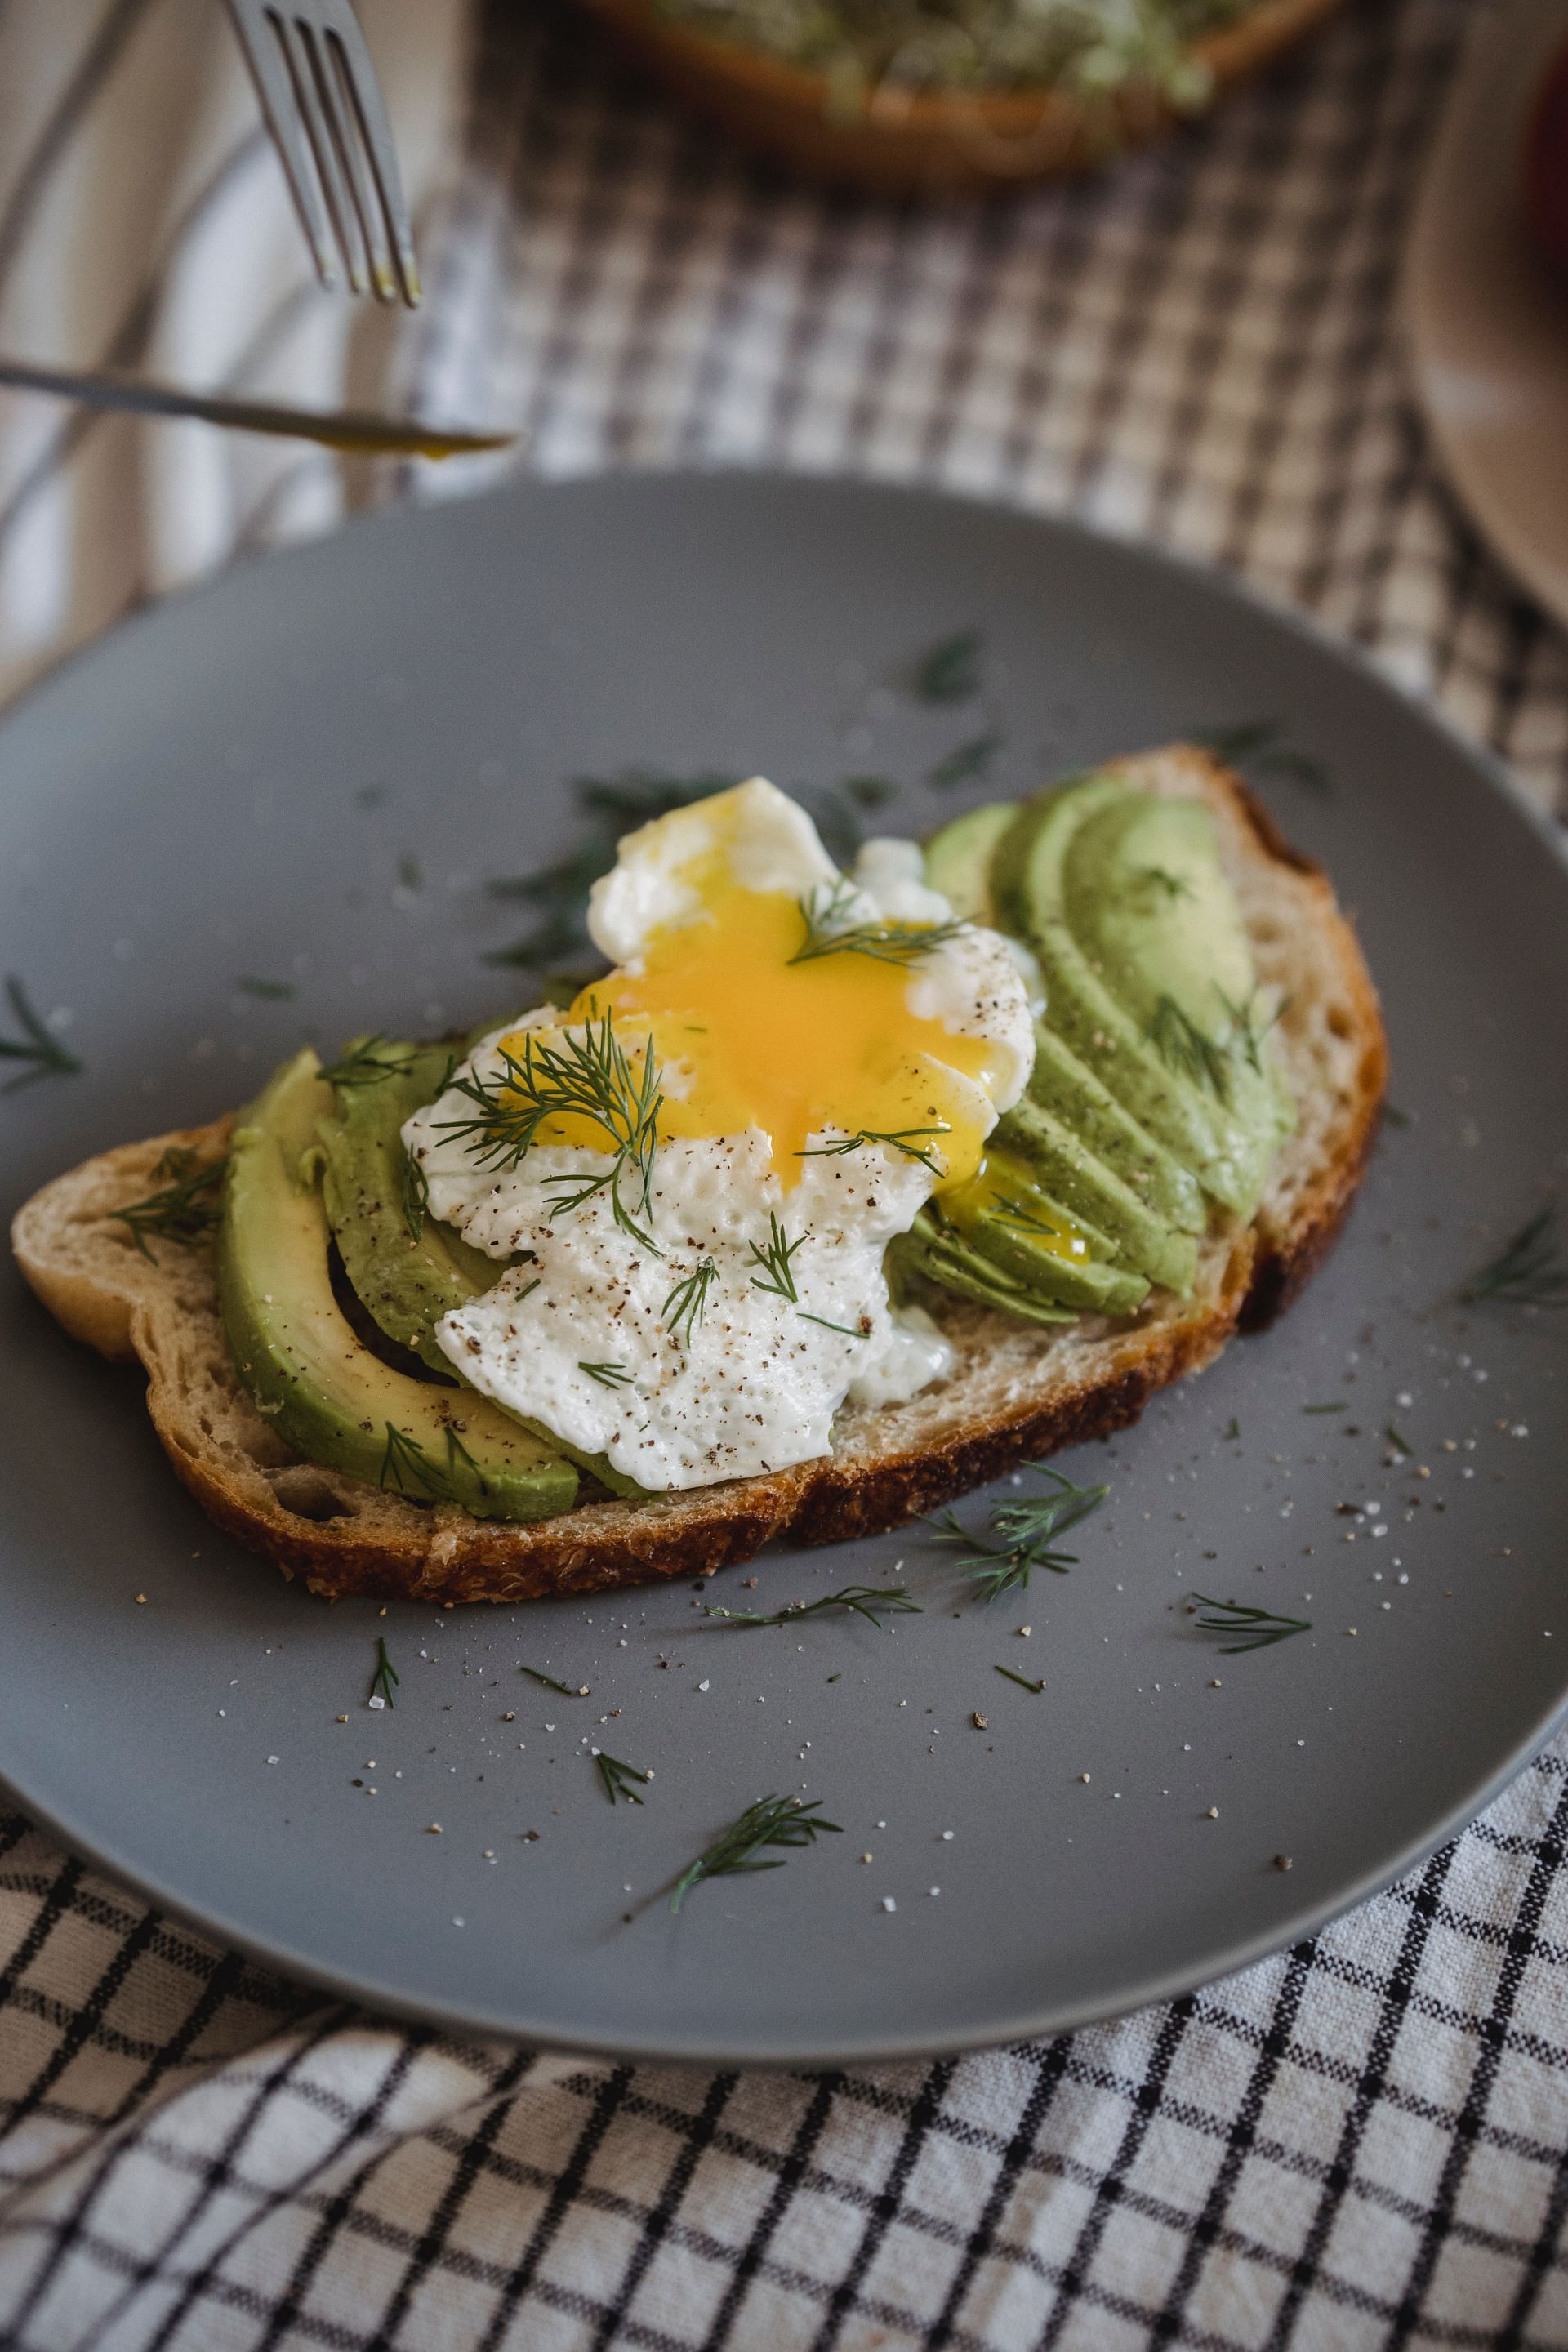 Avocado and eggs are good sources of Vitamin B5. (Image via Pexels)